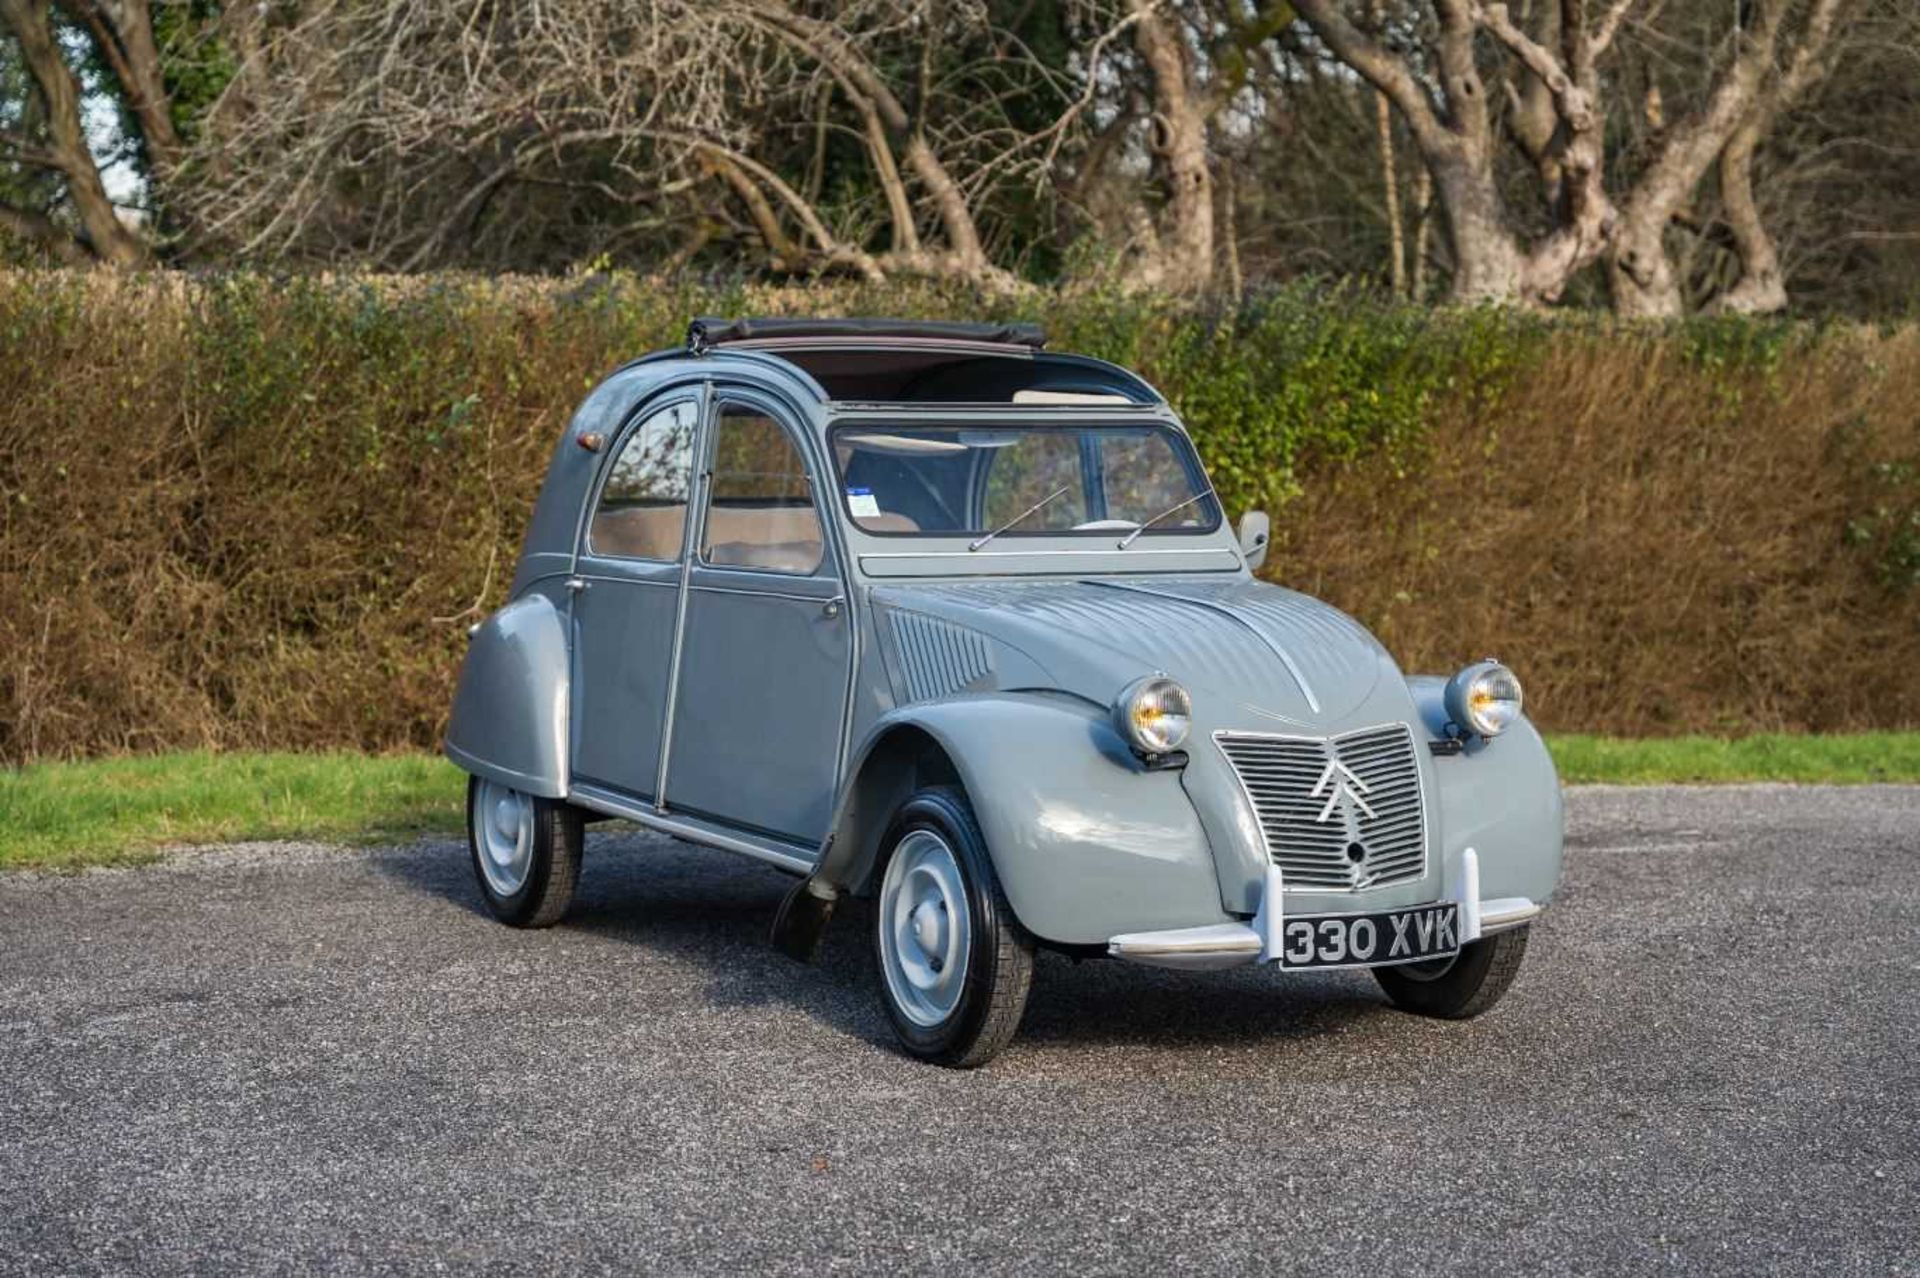 1958 Citroën 2CV AZL A rare, early example, with sought-after 'ripple bonnet' - Image 3 of 77